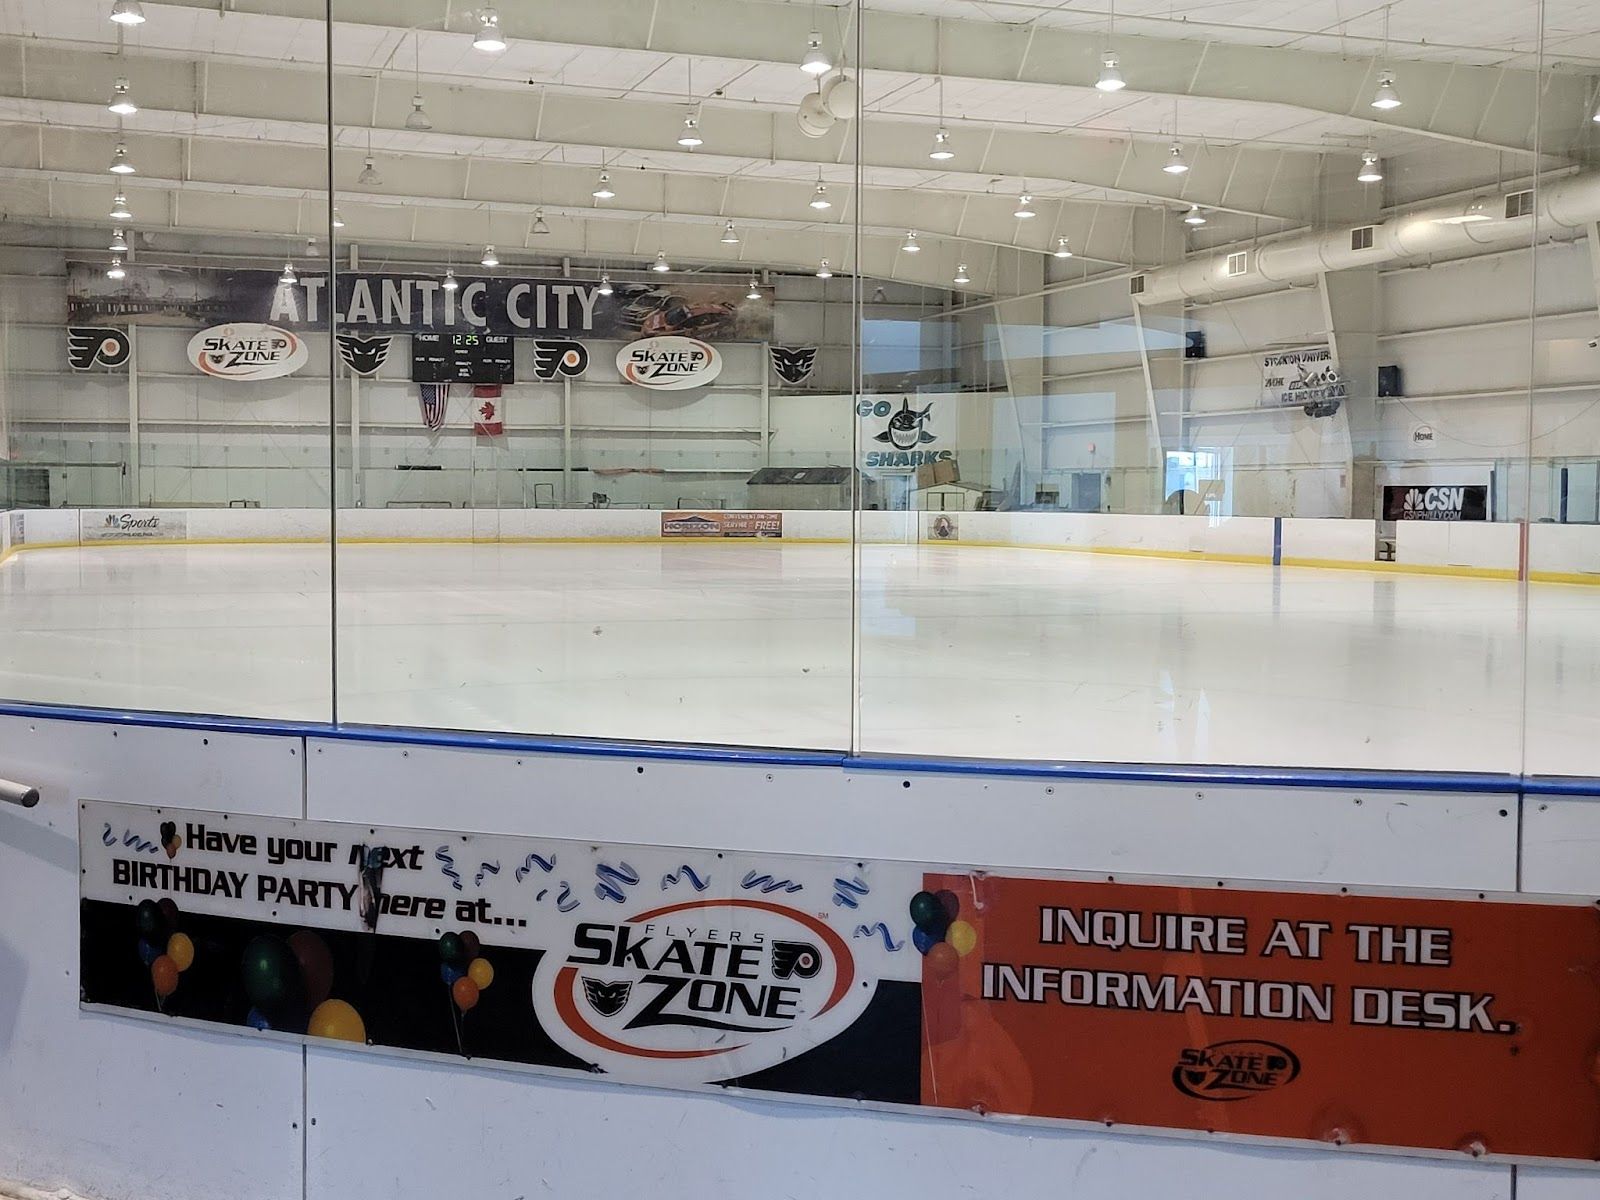 The Atlantic City Skate Zone will continue to be used as an ice skating facility. Image Source: City of Atlantic City